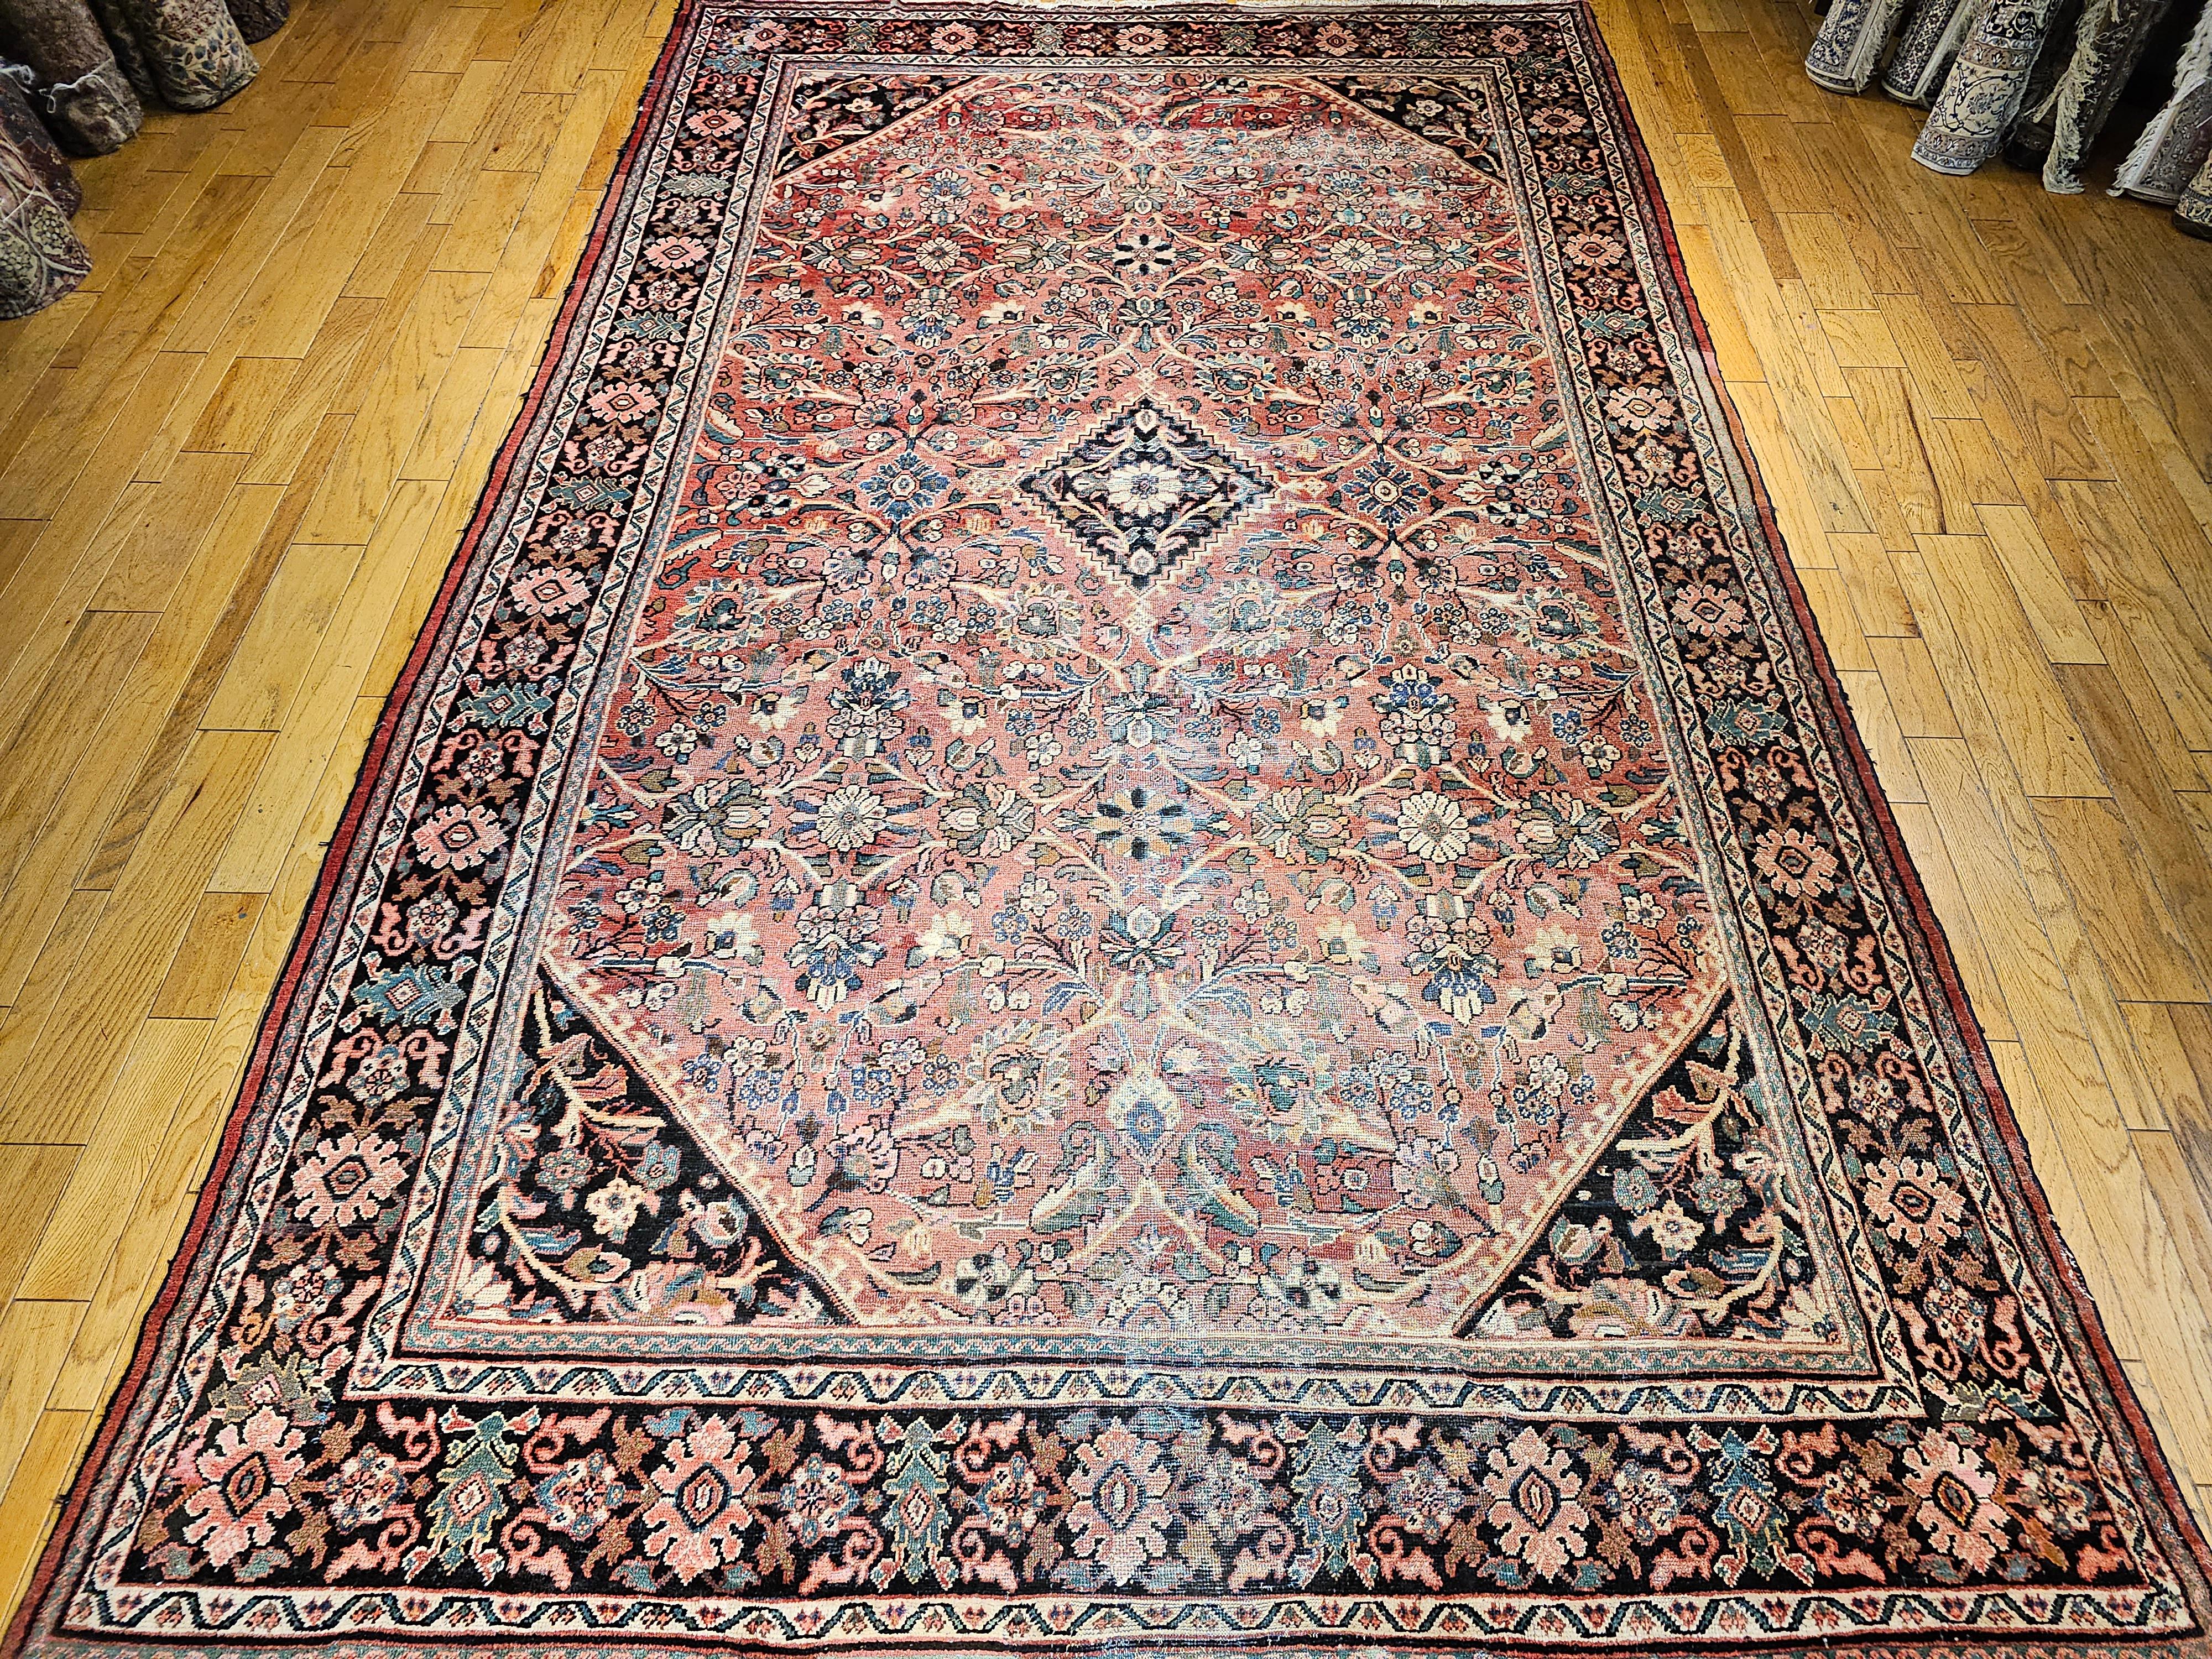 Beautiful oversized antique Mahal Sultanabad handwoven carpet from the early 1900s.  The rug has the feel and look of the bygone times when the weaving art was much appreciated.  It has an 